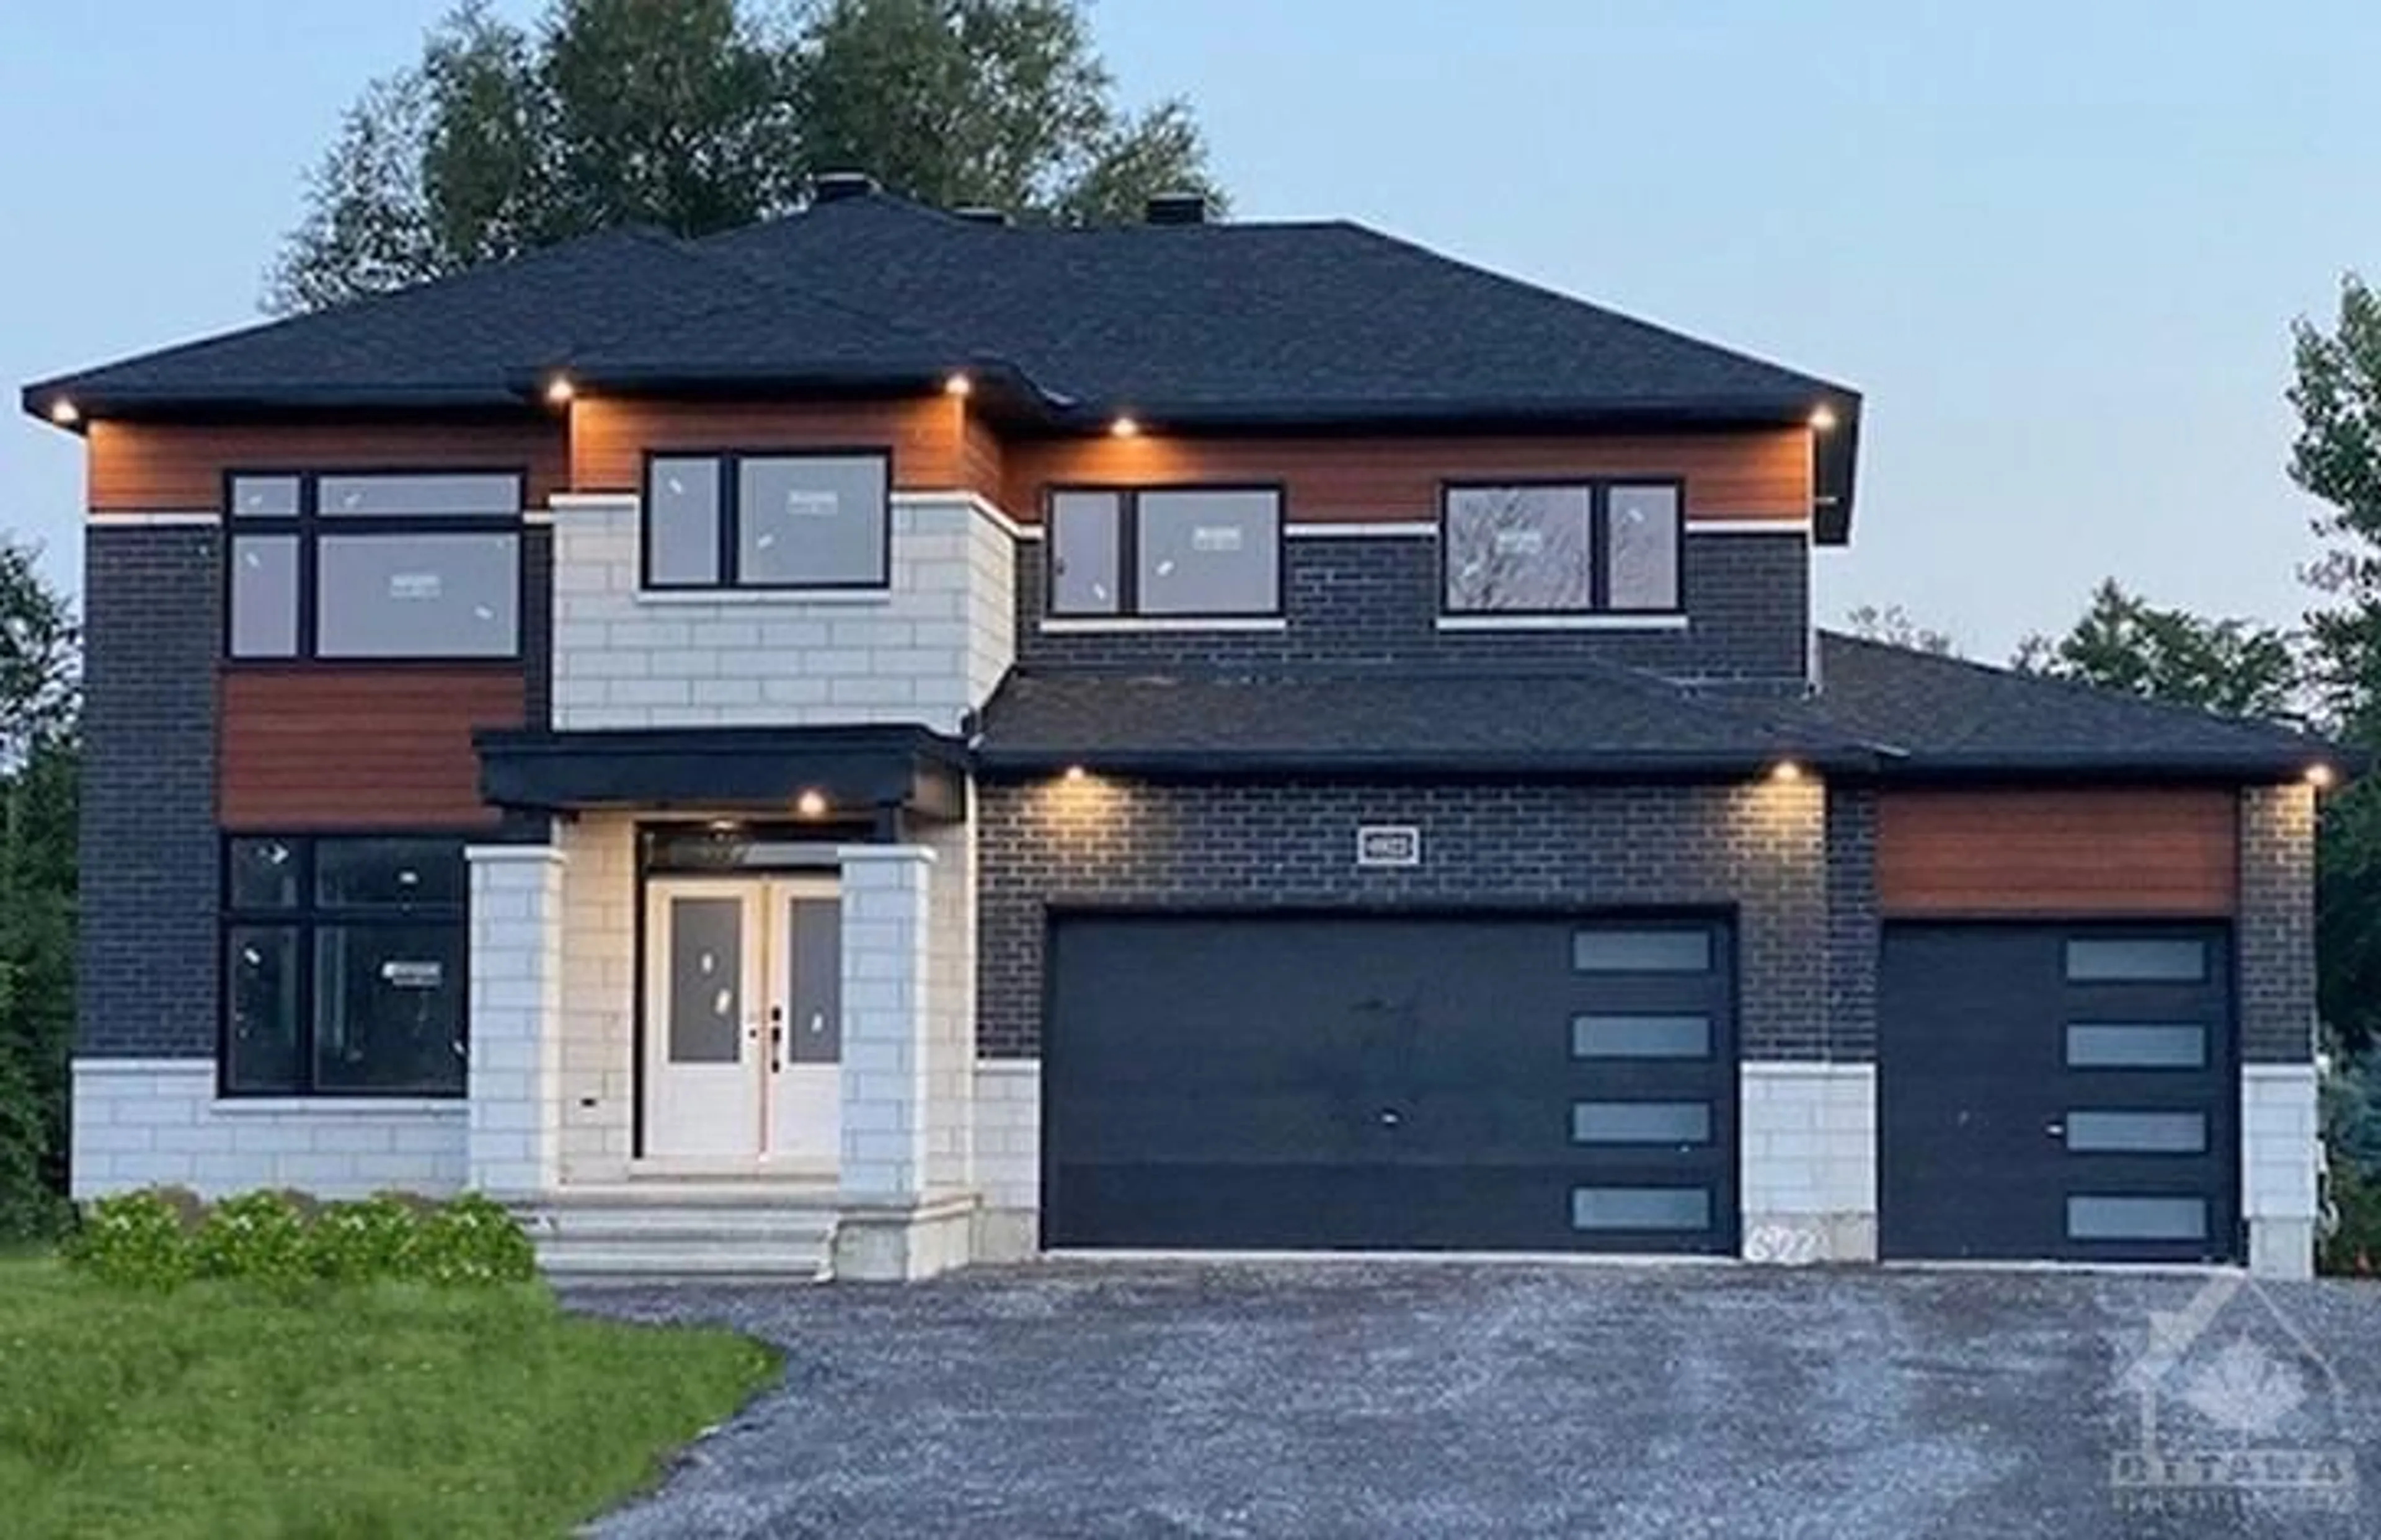 Home with brick exterior material for 402 FLEET CANUCK Pvt, Ottawa Ontario K2M 0M5